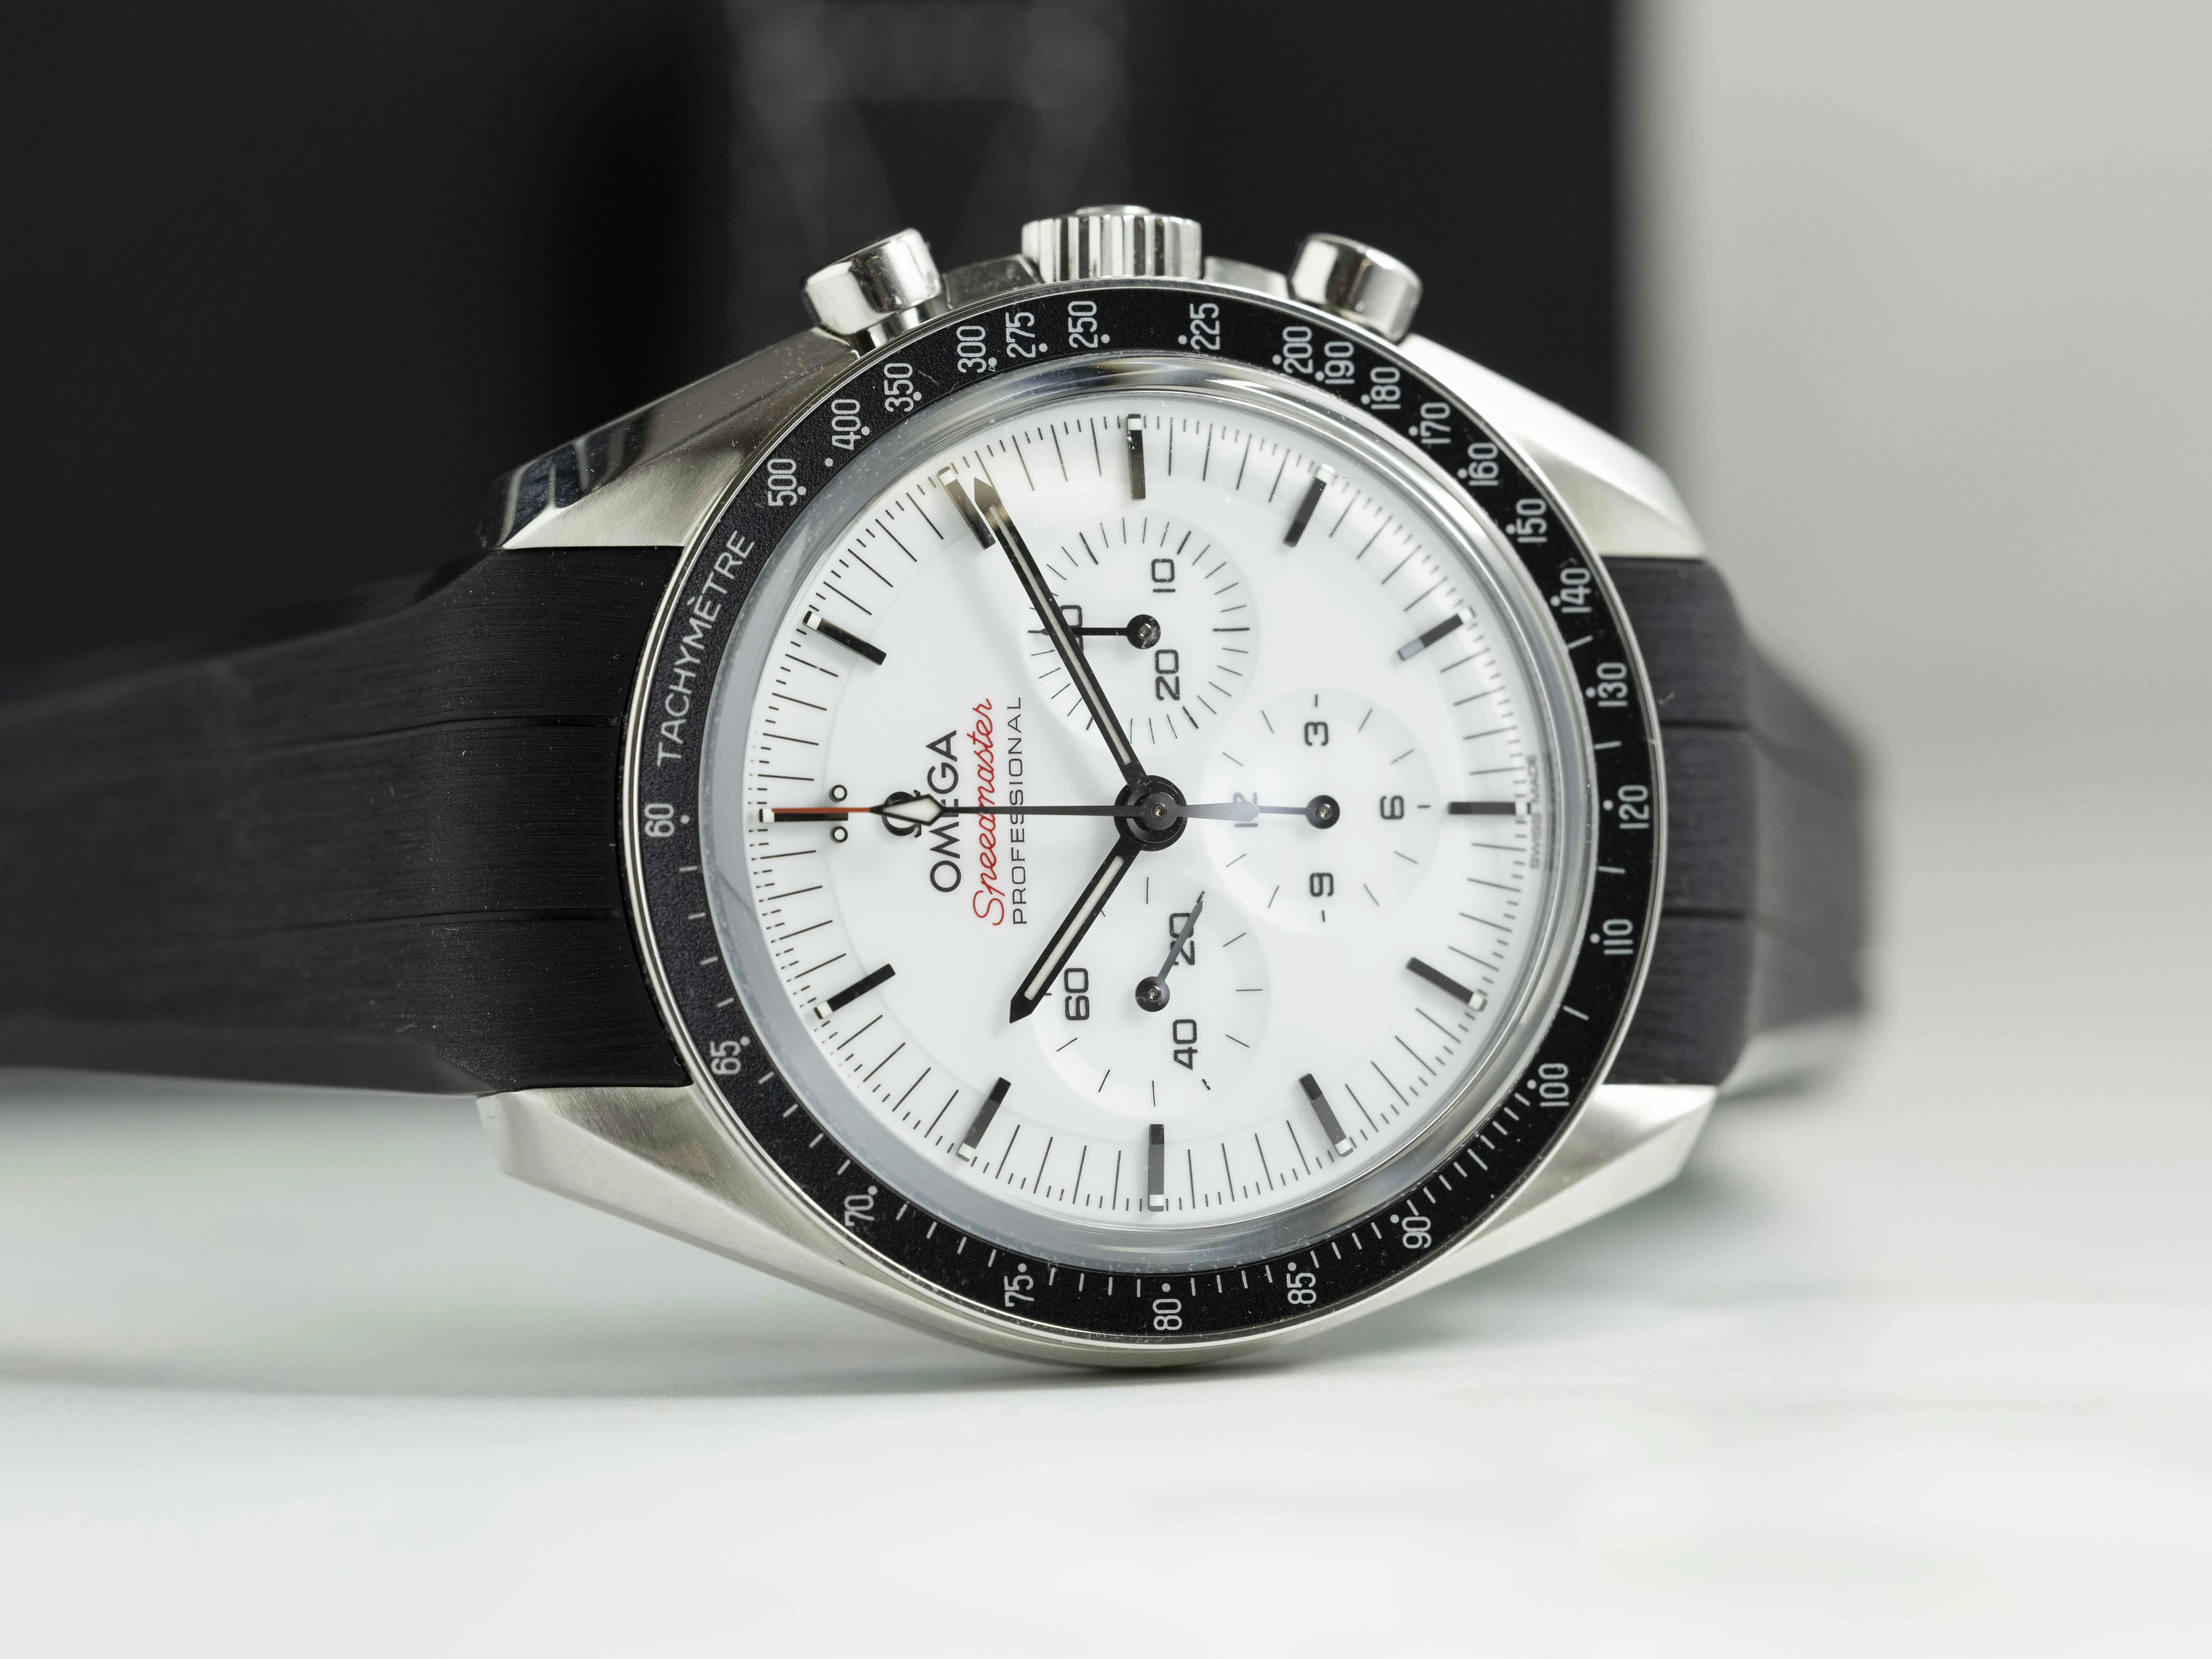 Omega Speedmaster Professional Moonwatch 310.32.42.50.04.001 42mm Stainless steel White 3